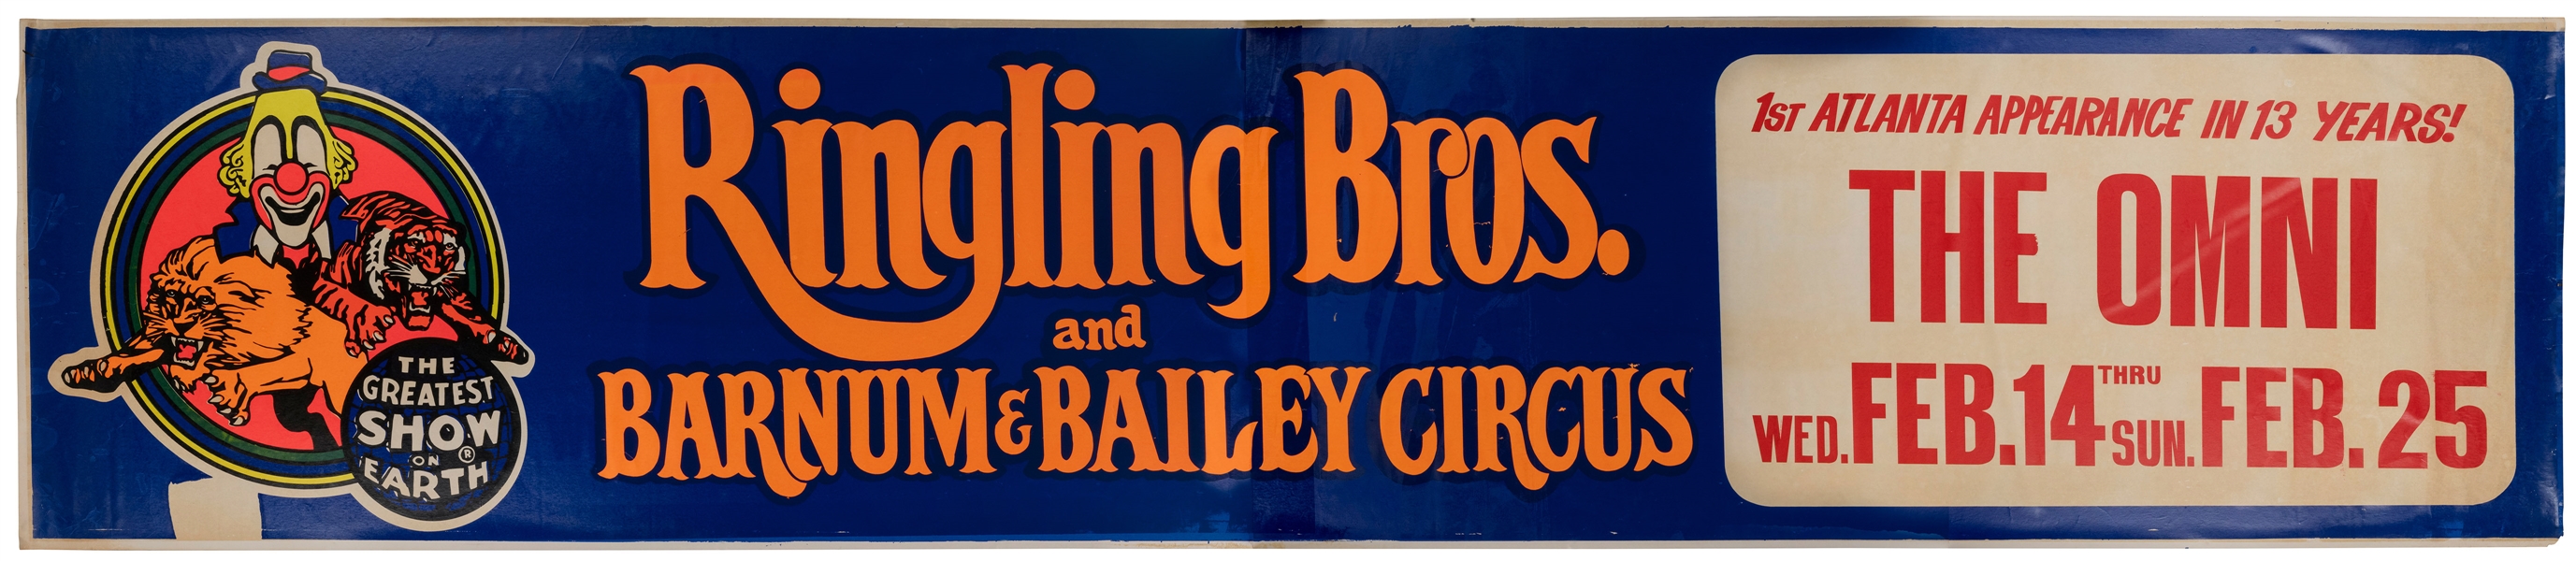  Ringling Bros. and Barnum & Bailey Circus Banner Poster. Ci...